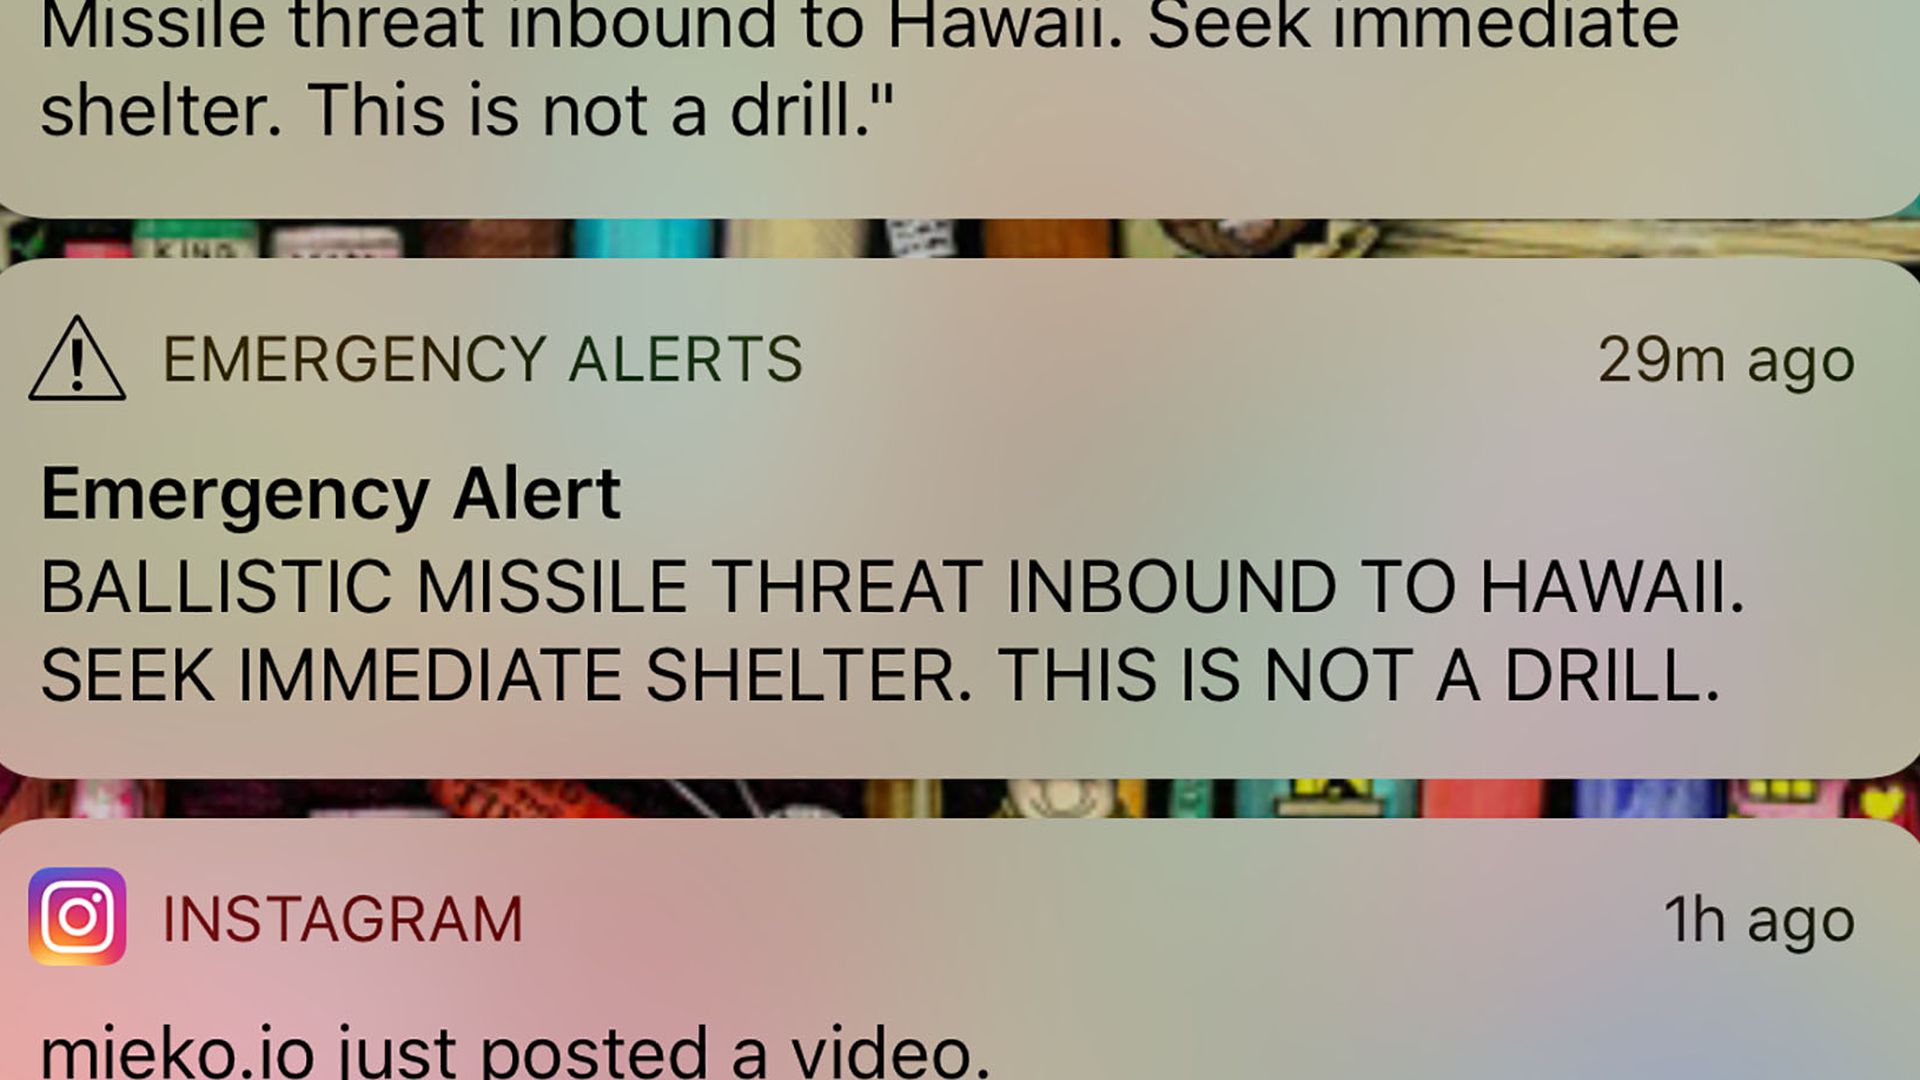 The Hawaii missile alert text message